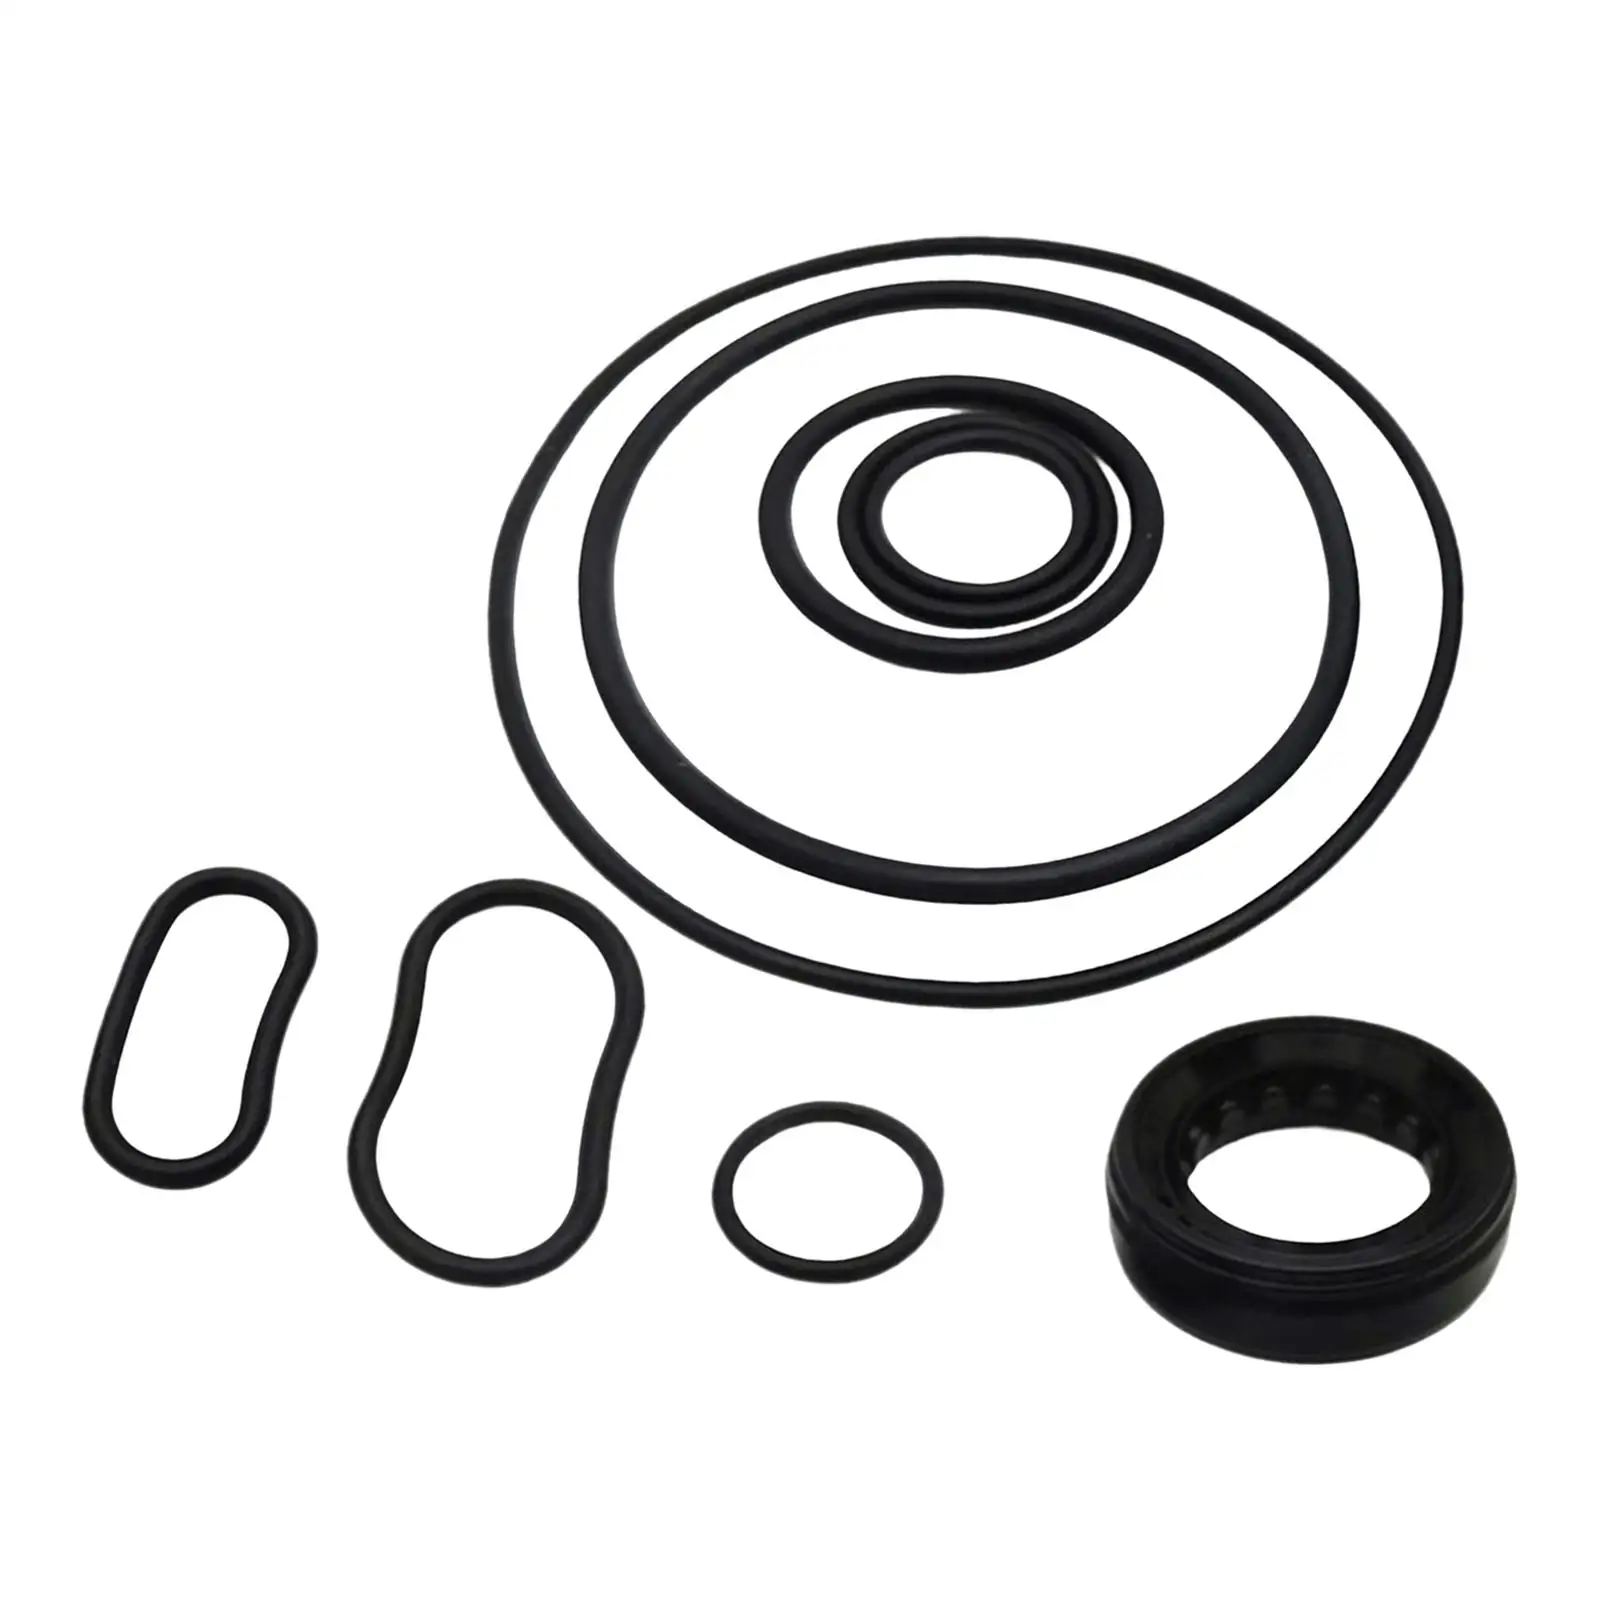 Power Steering Pump Seal Kit 06539-Pnc-003 Replacement Vehicle Professional Auto